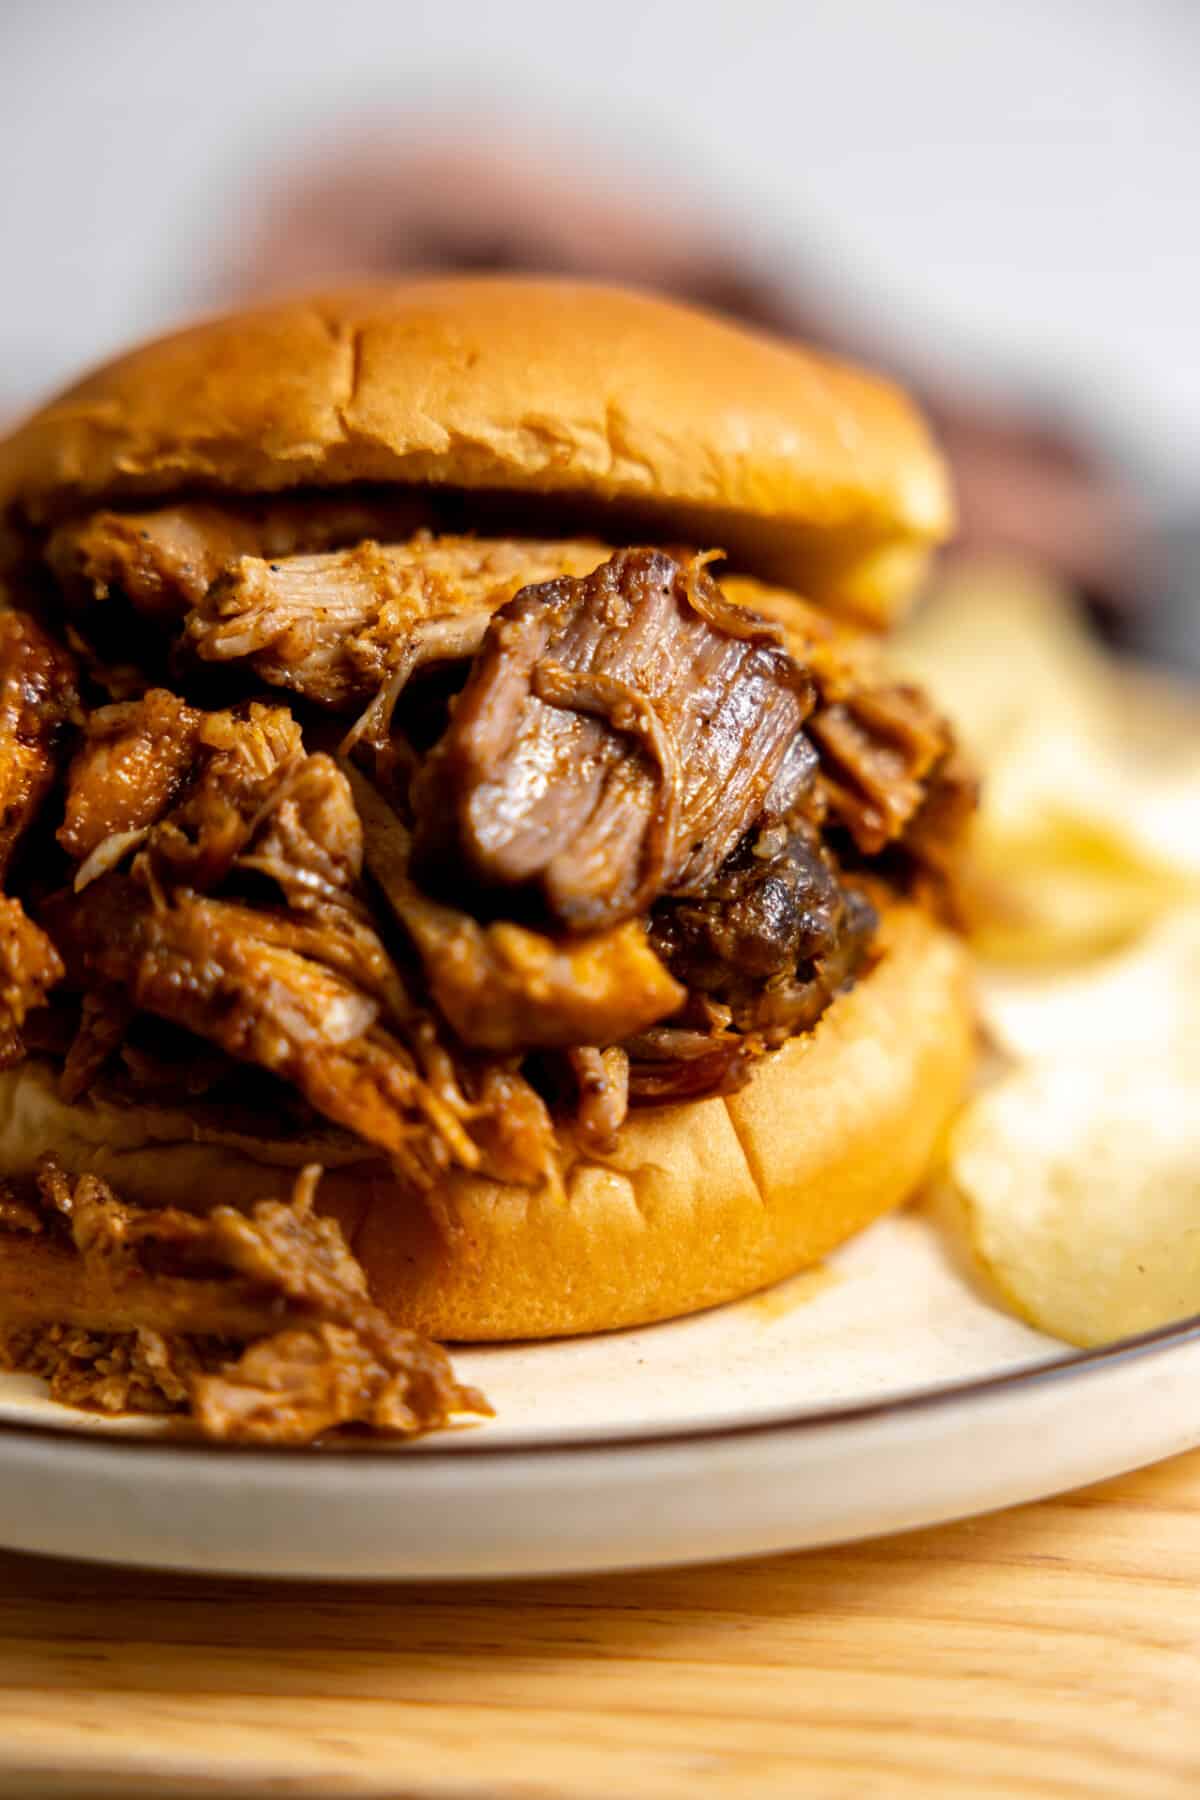 Pulled pork sandwich served with potato chips.